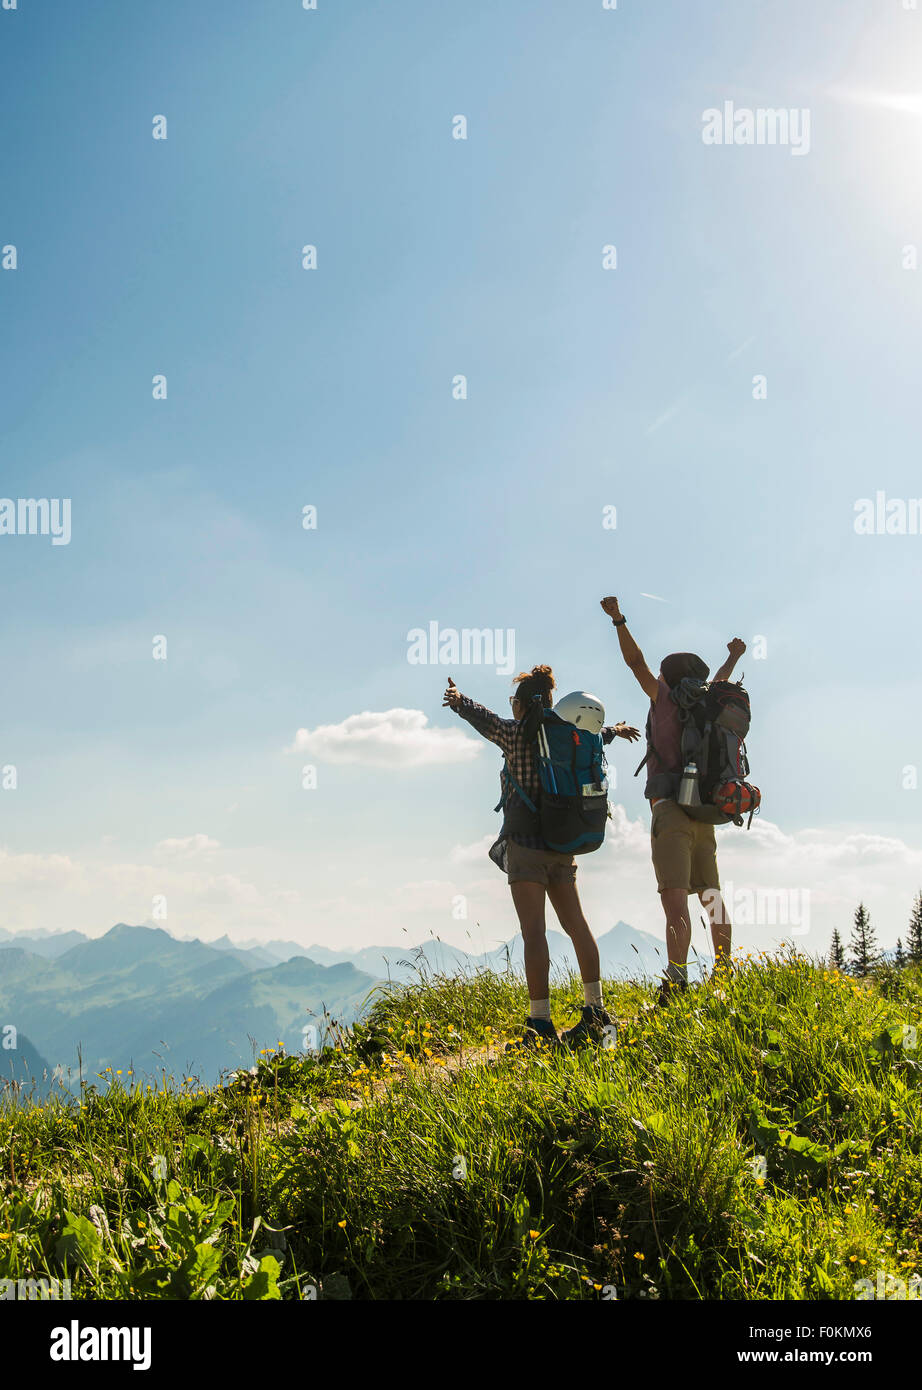 Austria, Tyrol, Tannheimer Tal, cheering young couple standing on mountain trail looking at view Stock Photo